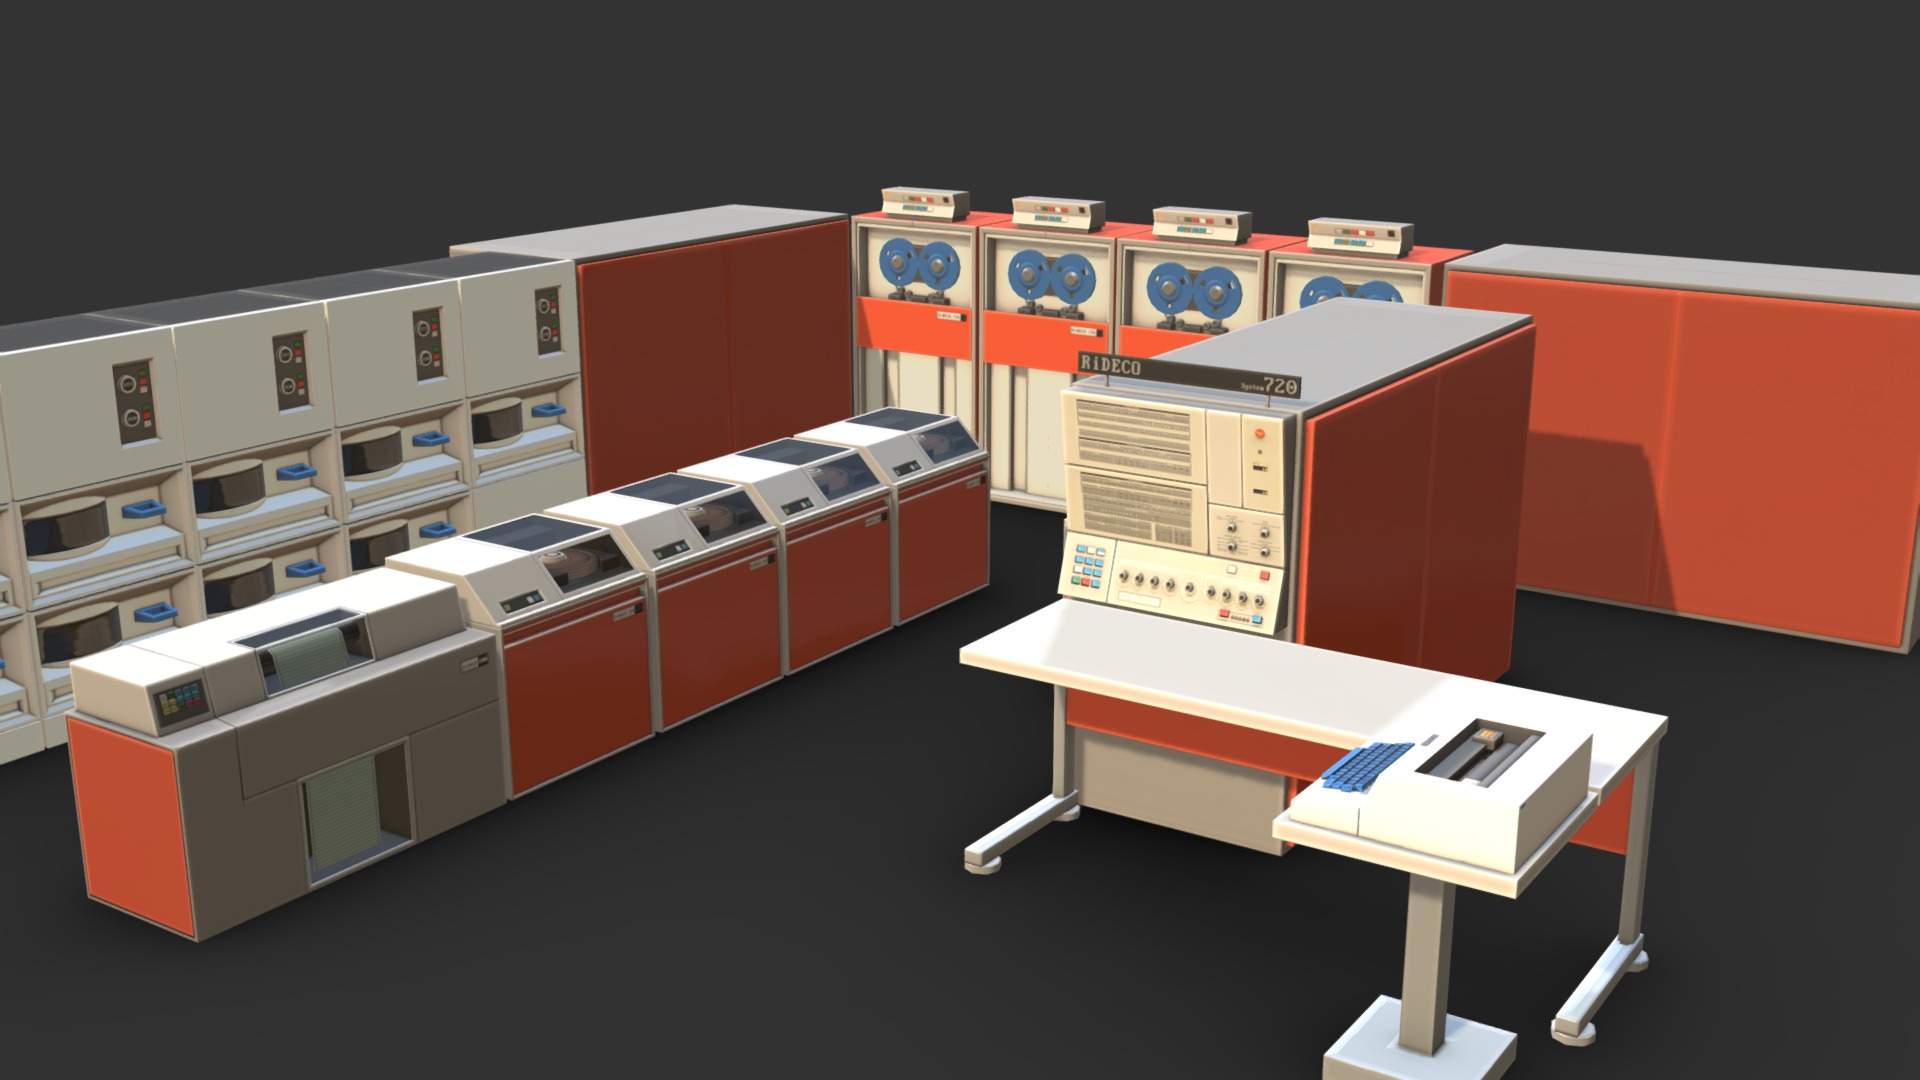 3D model RiDECO – System 720 – Computer Mainframe for SL - This is a 3D model of the RiDECO - System 720 - Computer Mainframe for SL. The 3D model is about a room with a table and chairs.